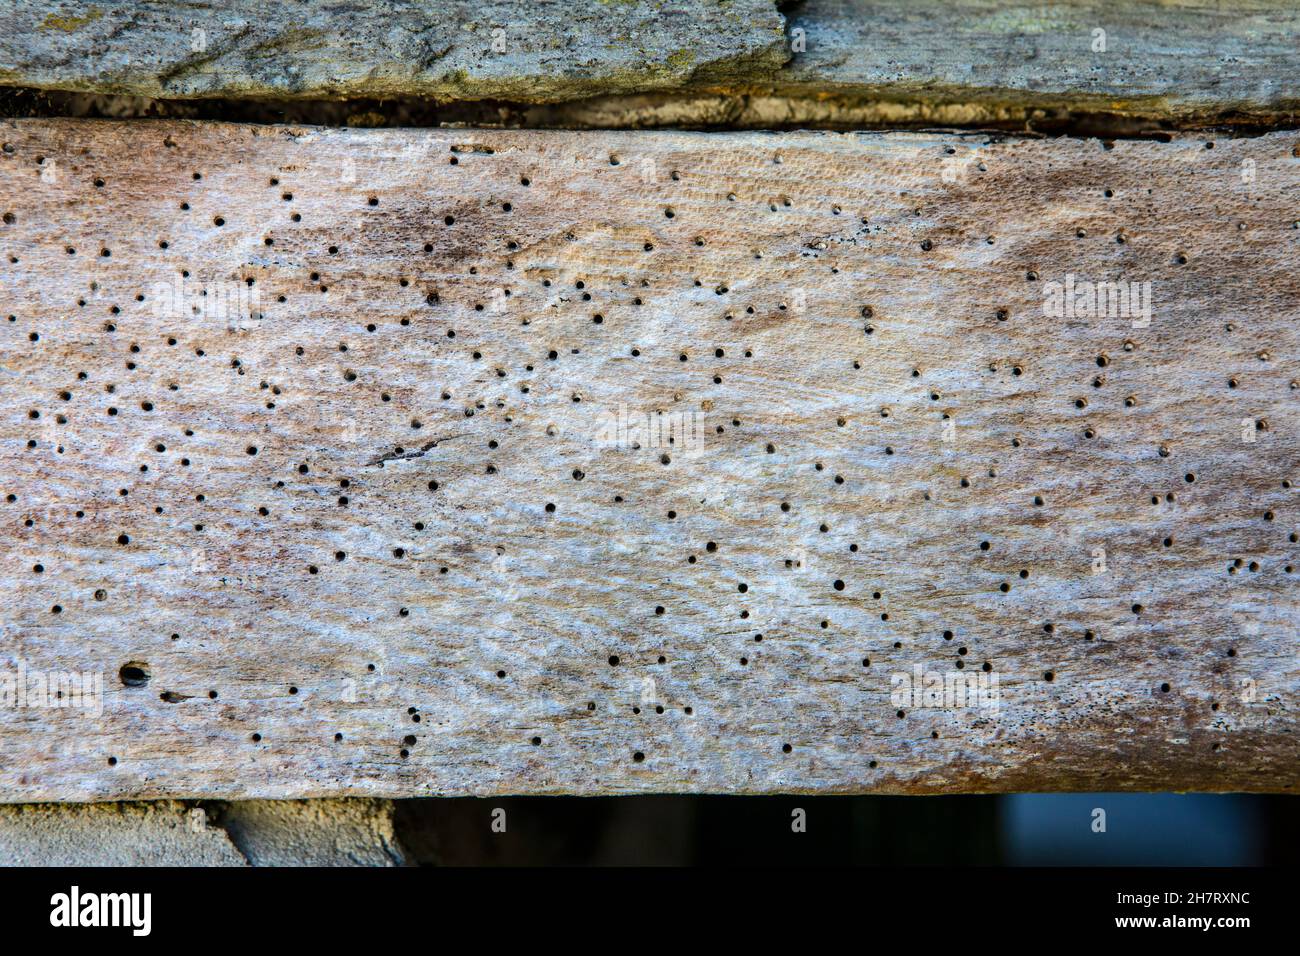 Close-up of woodworm in a beam of wood. Stock Photo